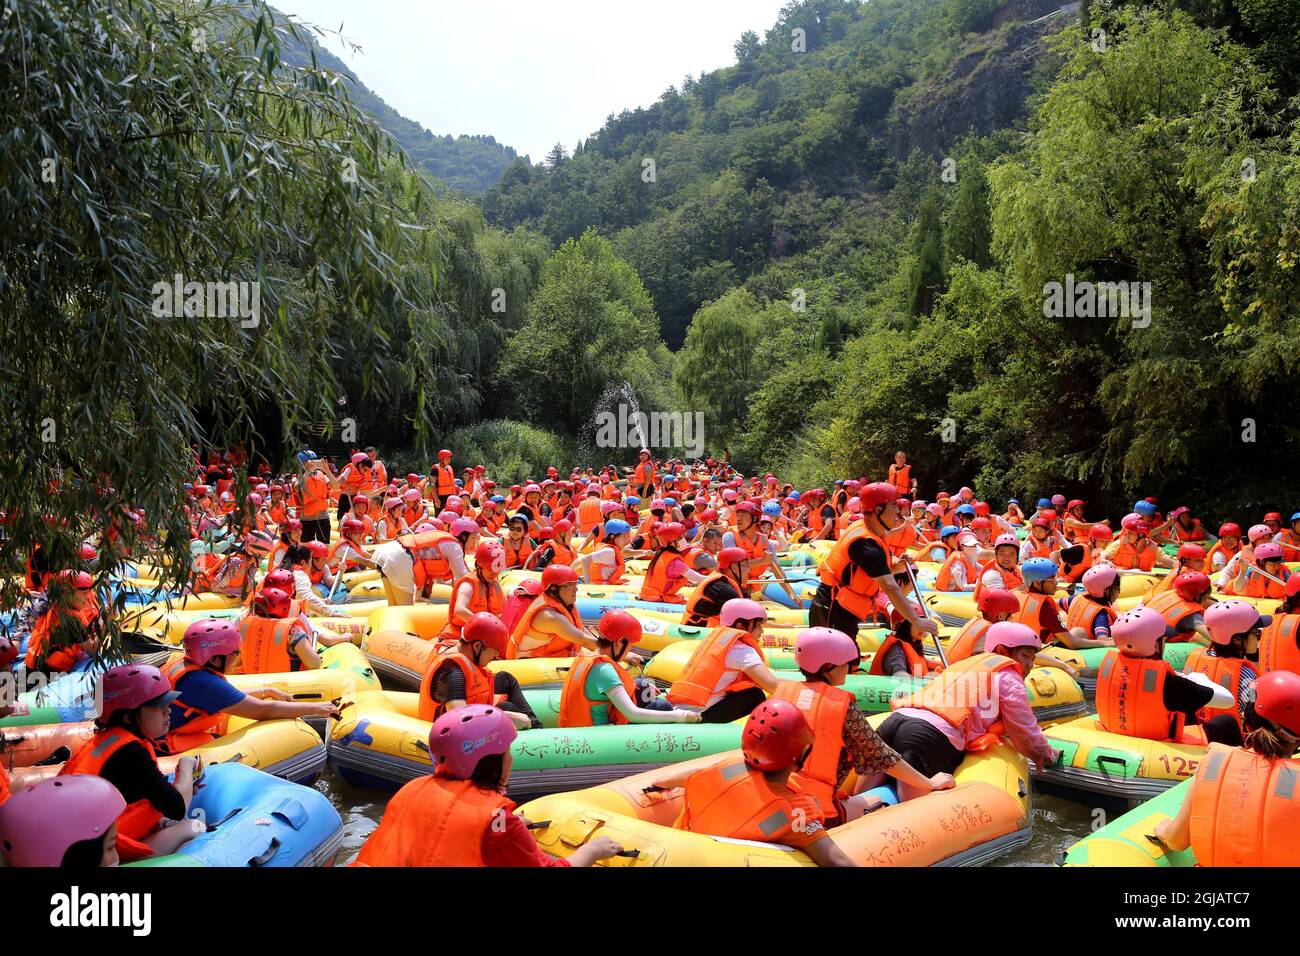 Sanmenxia 2017-08-05 Sanmenxia, CHINA-August 5 2017: (EDITORIAL USE ONLY. CHINA OUT) Numerous tourists flock to Yuxi Grand Canyon for rafting in Sanmenxia, central China's Henan Province, August 5th, 2017. (Photo by /Sipa USA) *** Please Use Credit from Credit Field *** Foto Sipa Asia / ddp USA / TT / kod 10557 ref: 20796378 **  Stock Photo